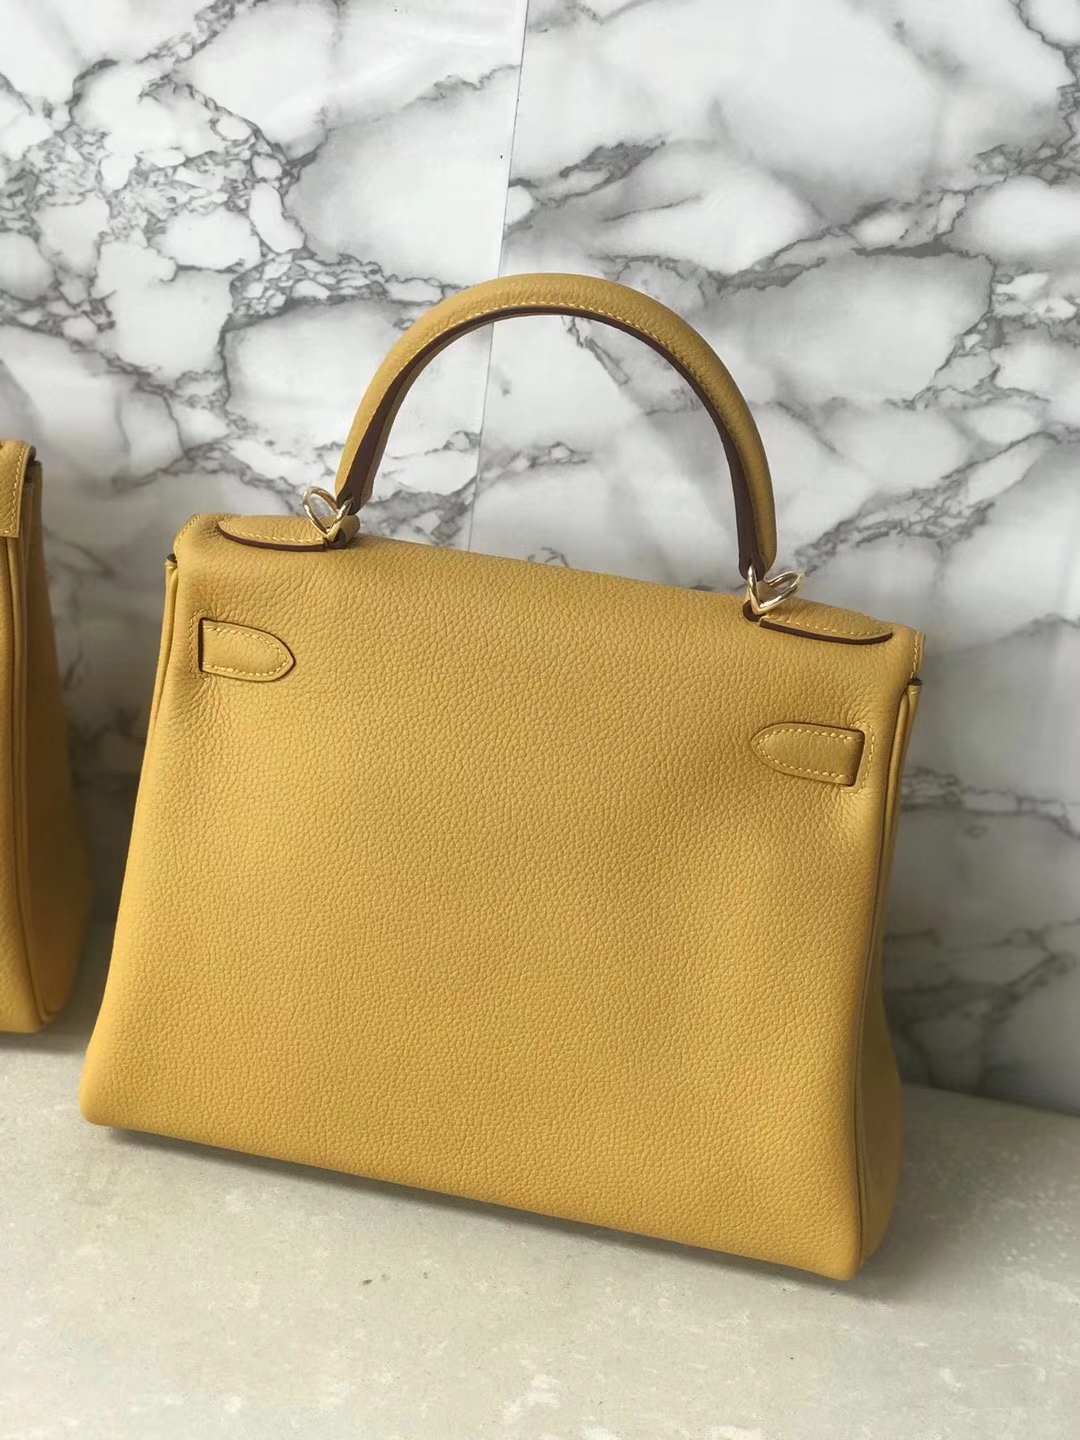 Wholesale Hermes Kelly Bag28CM in 9D Ambre Yellow Togo Leather Gold Hardware